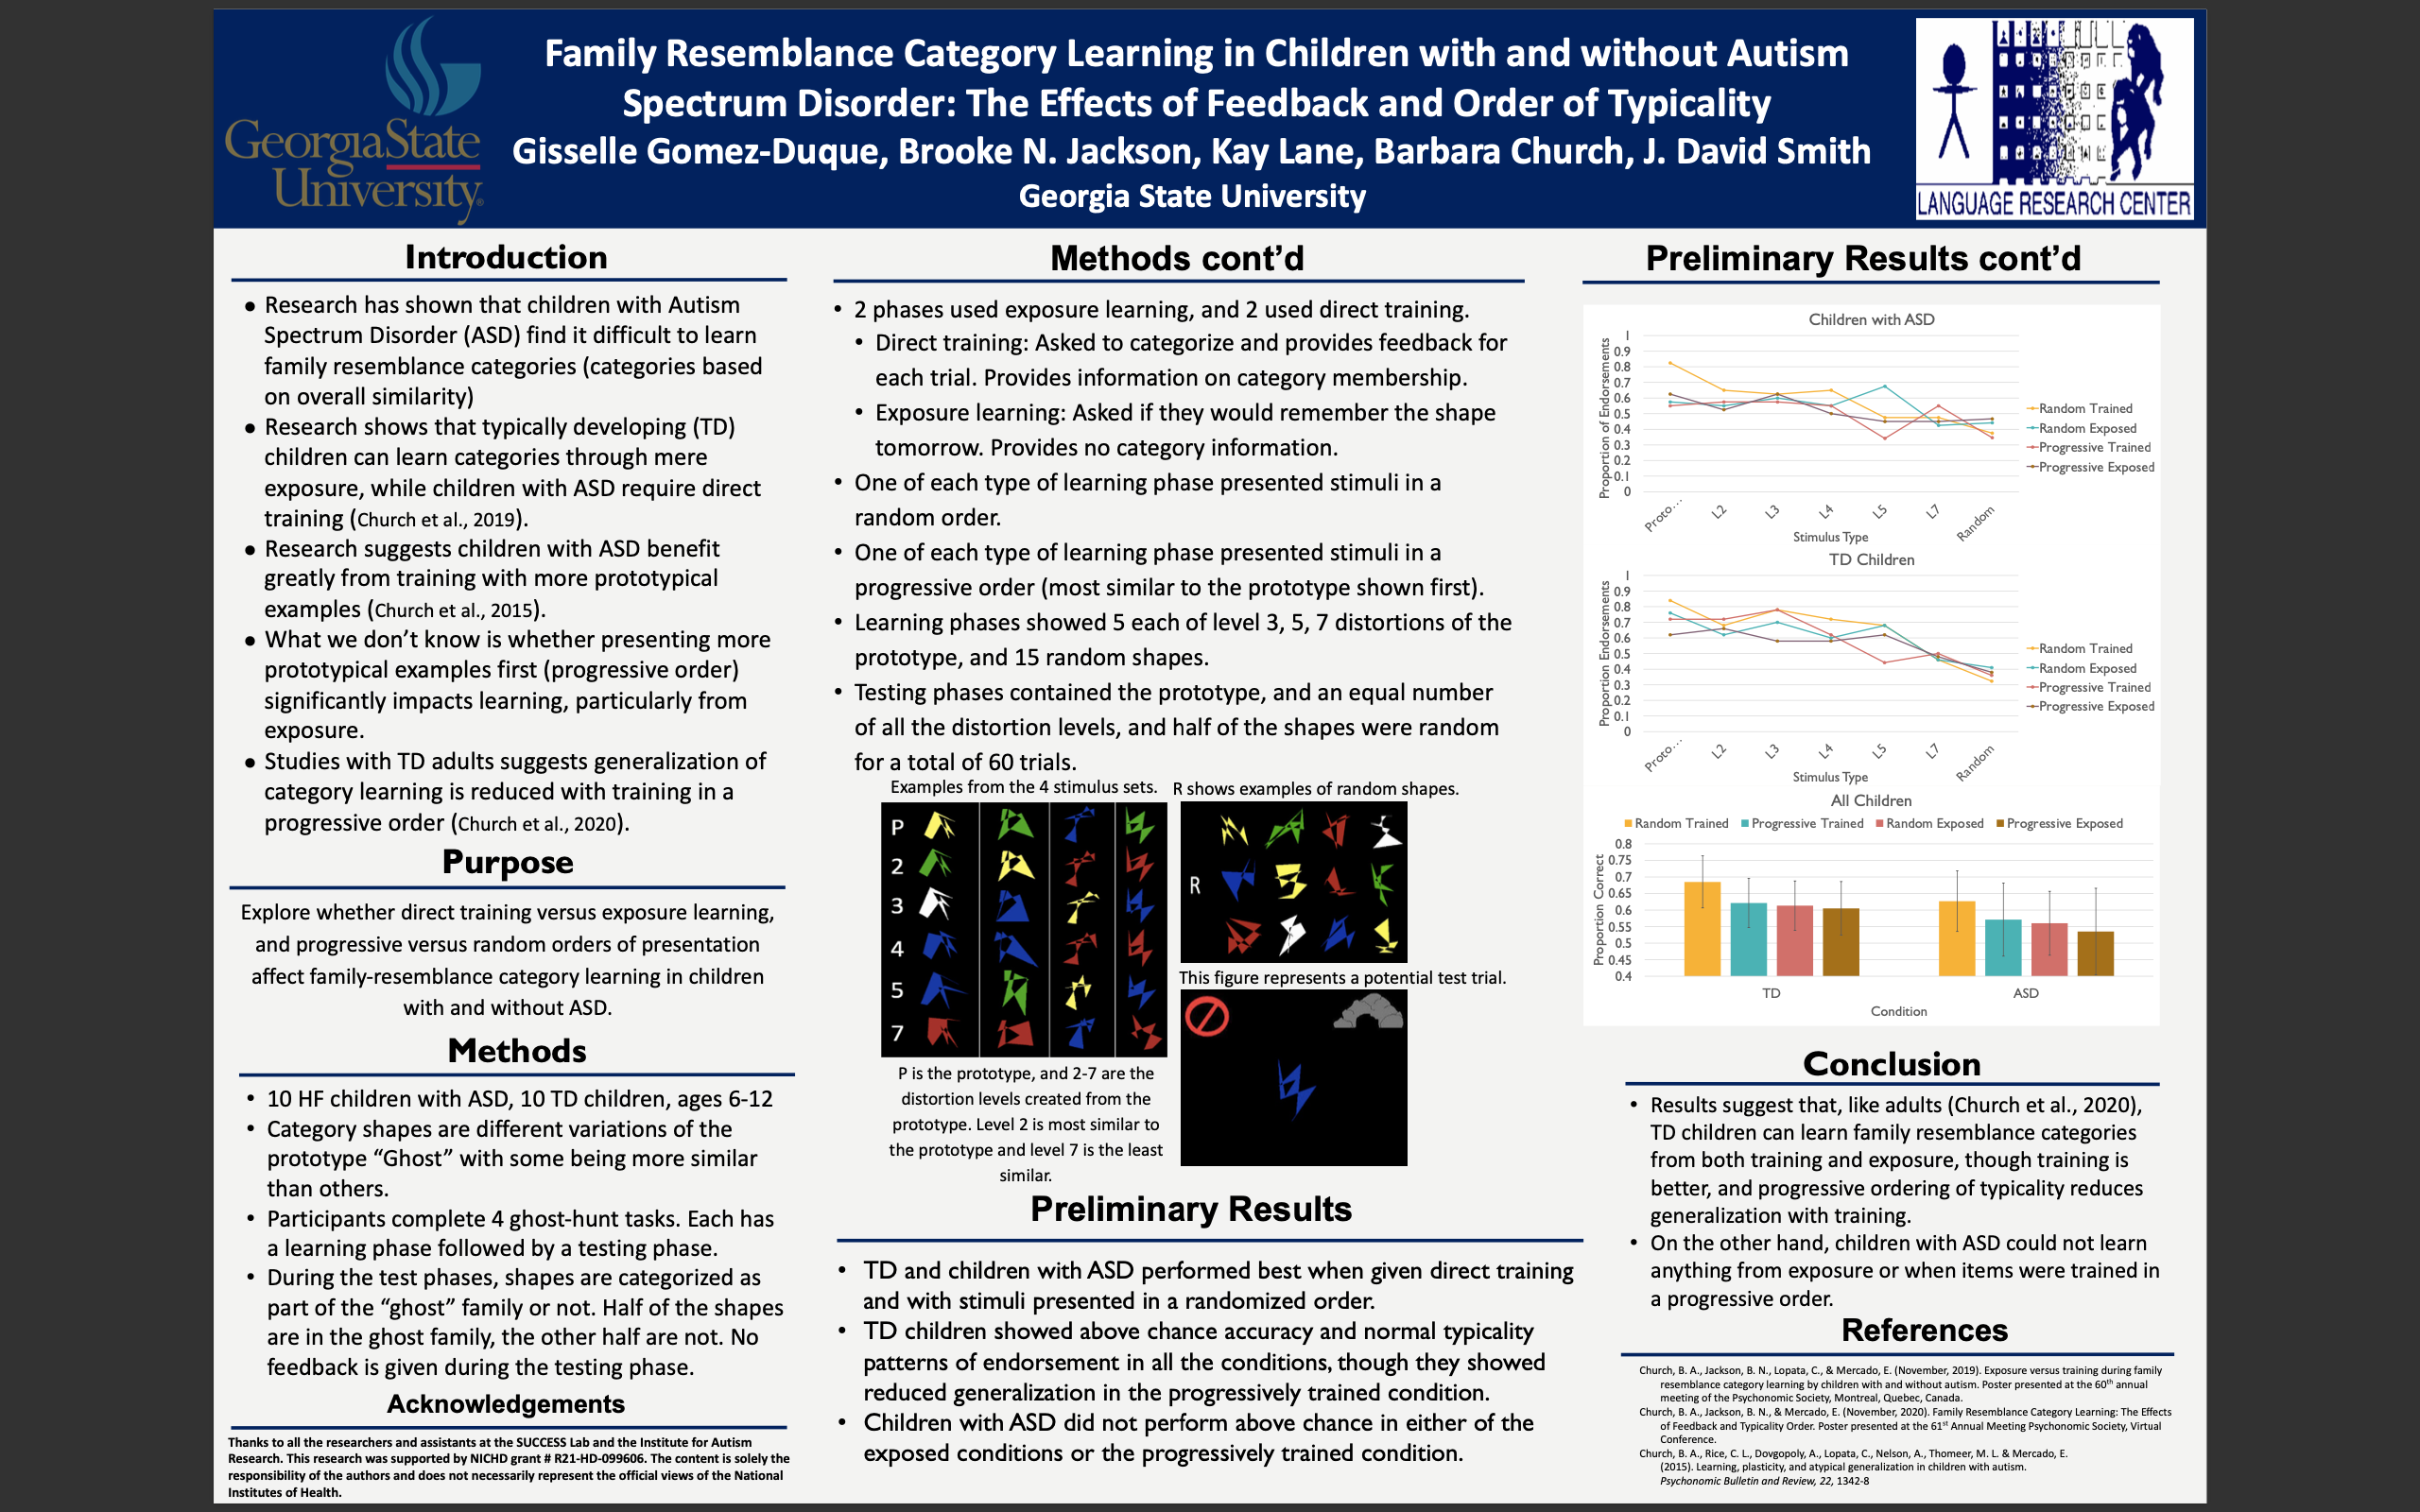 Showcase Image for Family Resemblance Category Learning in Children with and without Autism Spectrum Disorder: The Effects of Feedback and Order of Typicality